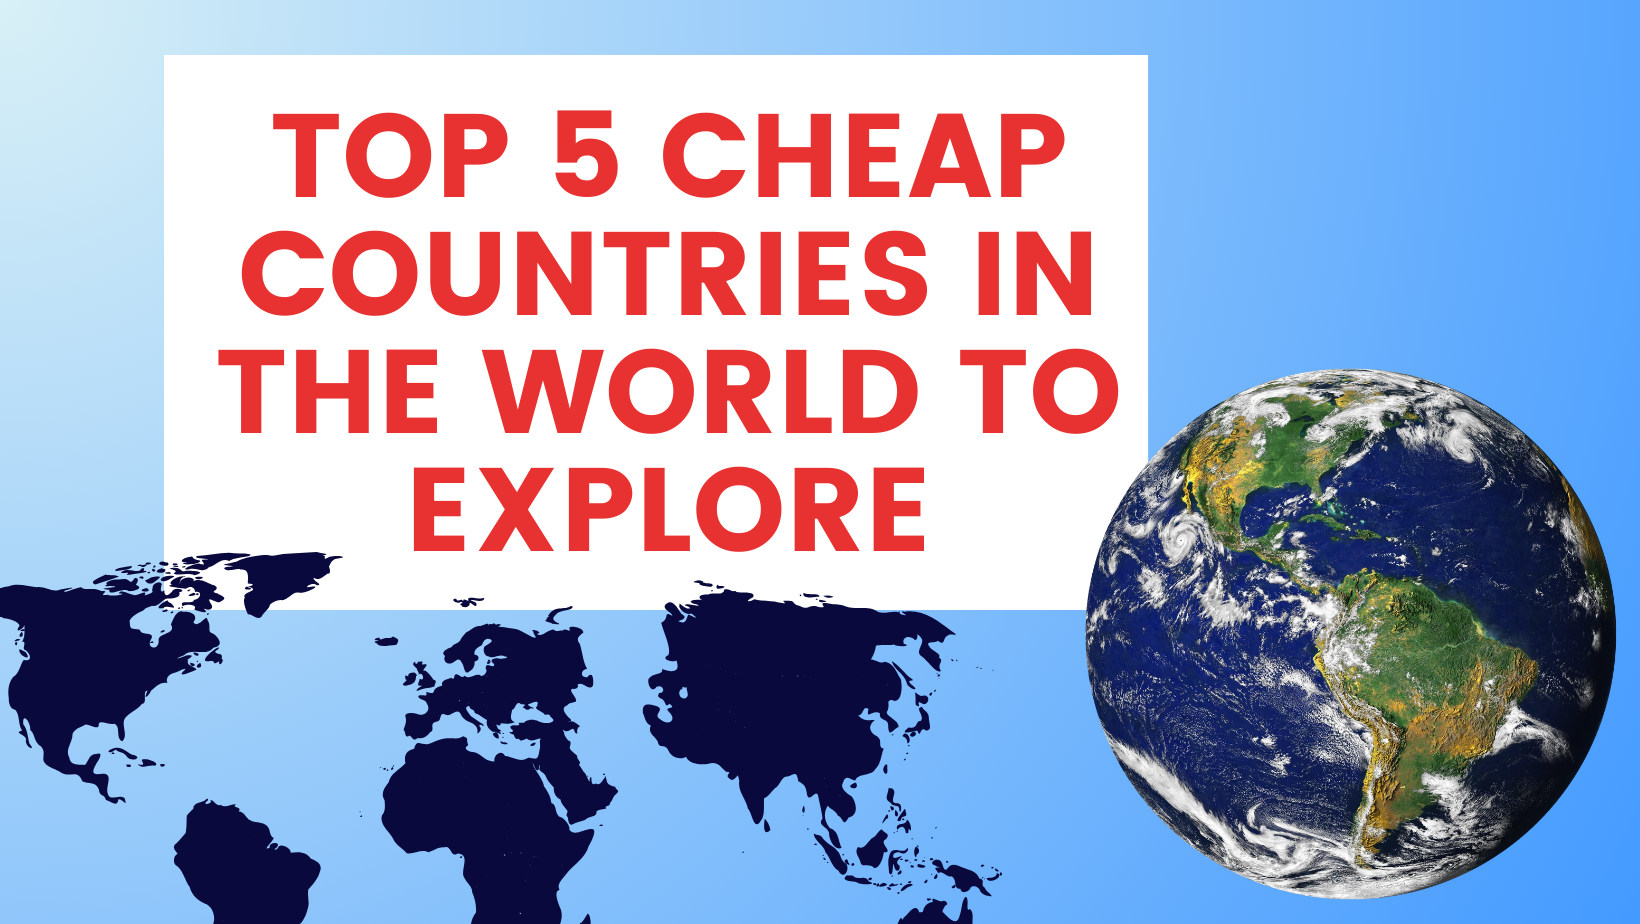 Top 5 Cheap Countries in the World to Explore